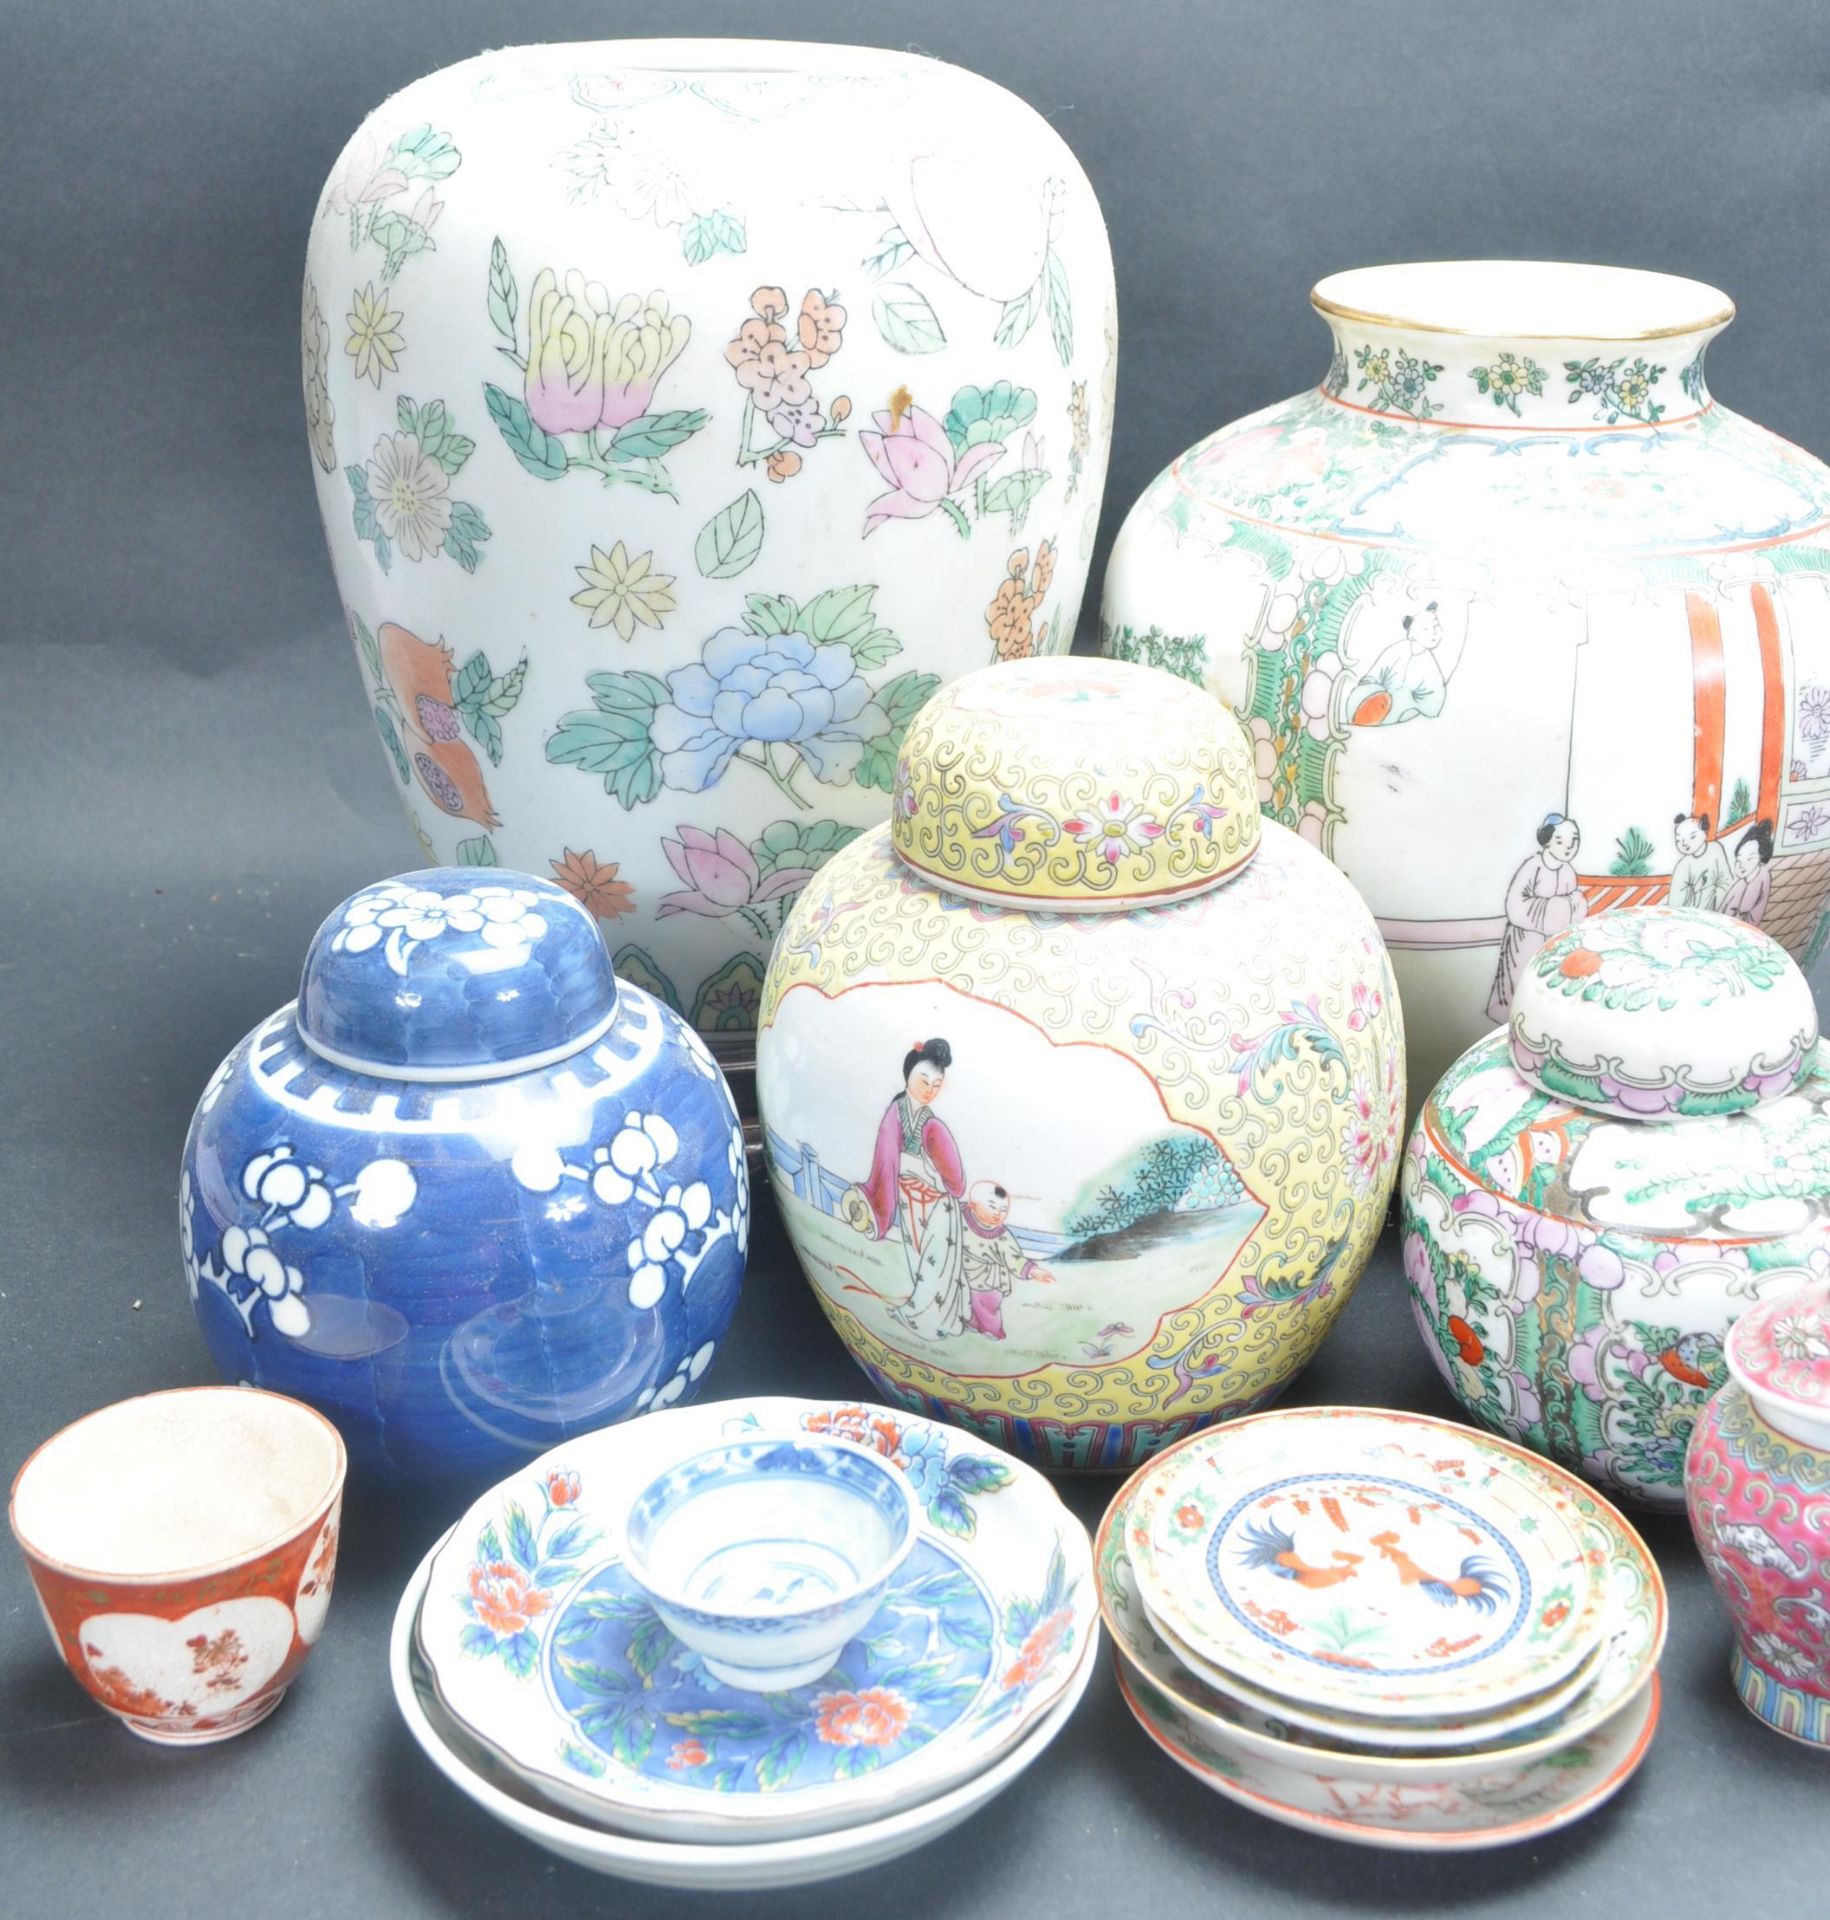 COLLECTION OF 20TH CENTURY CHINESE GINGER JARS, PLATES AND VASES. - Image 2 of 11